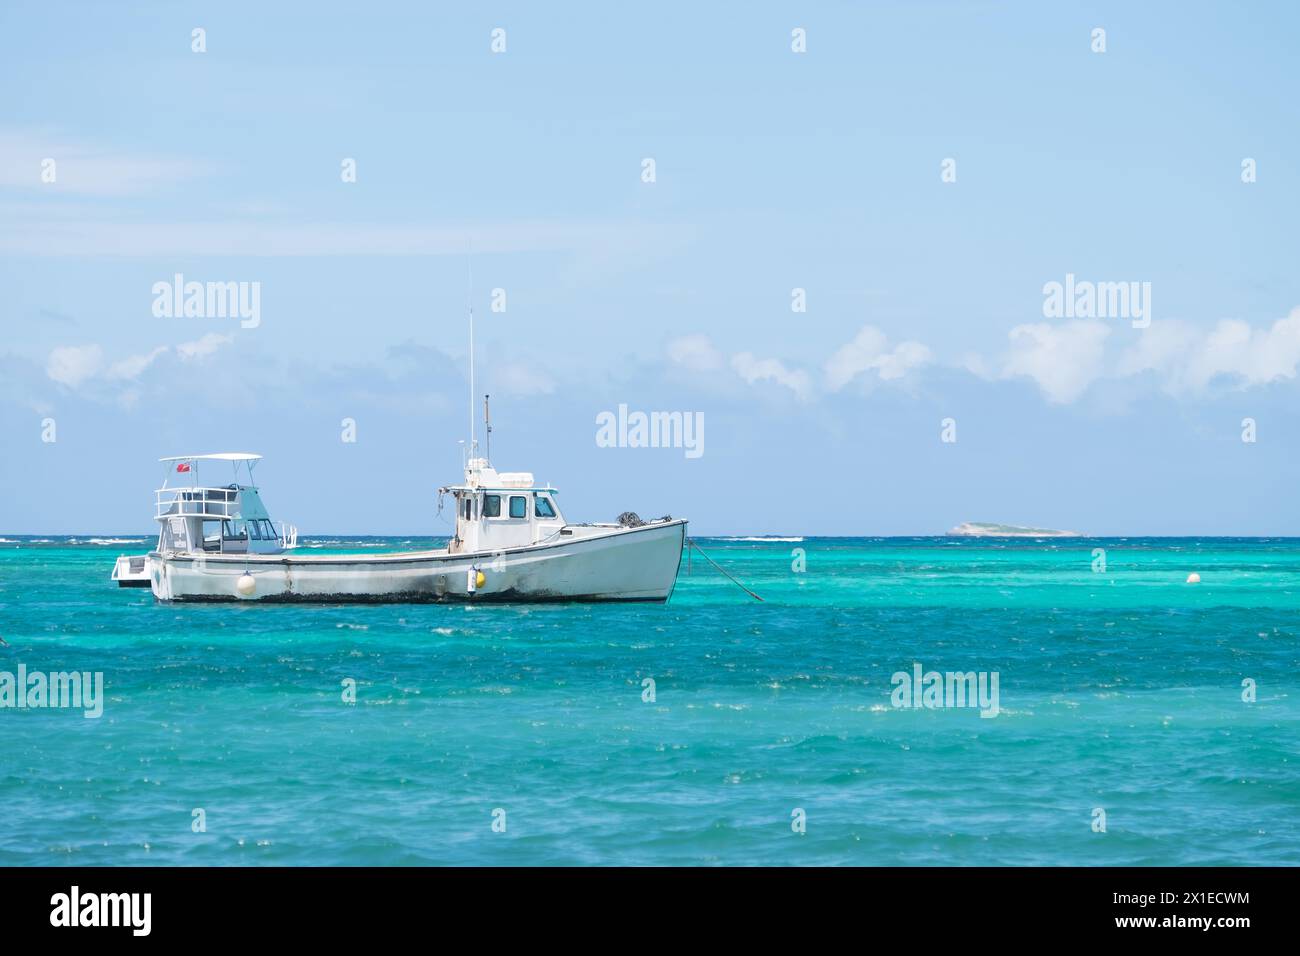 A small white boat is floating in the ocean. The sky is clear and blue, and the water is calm Stock Photo